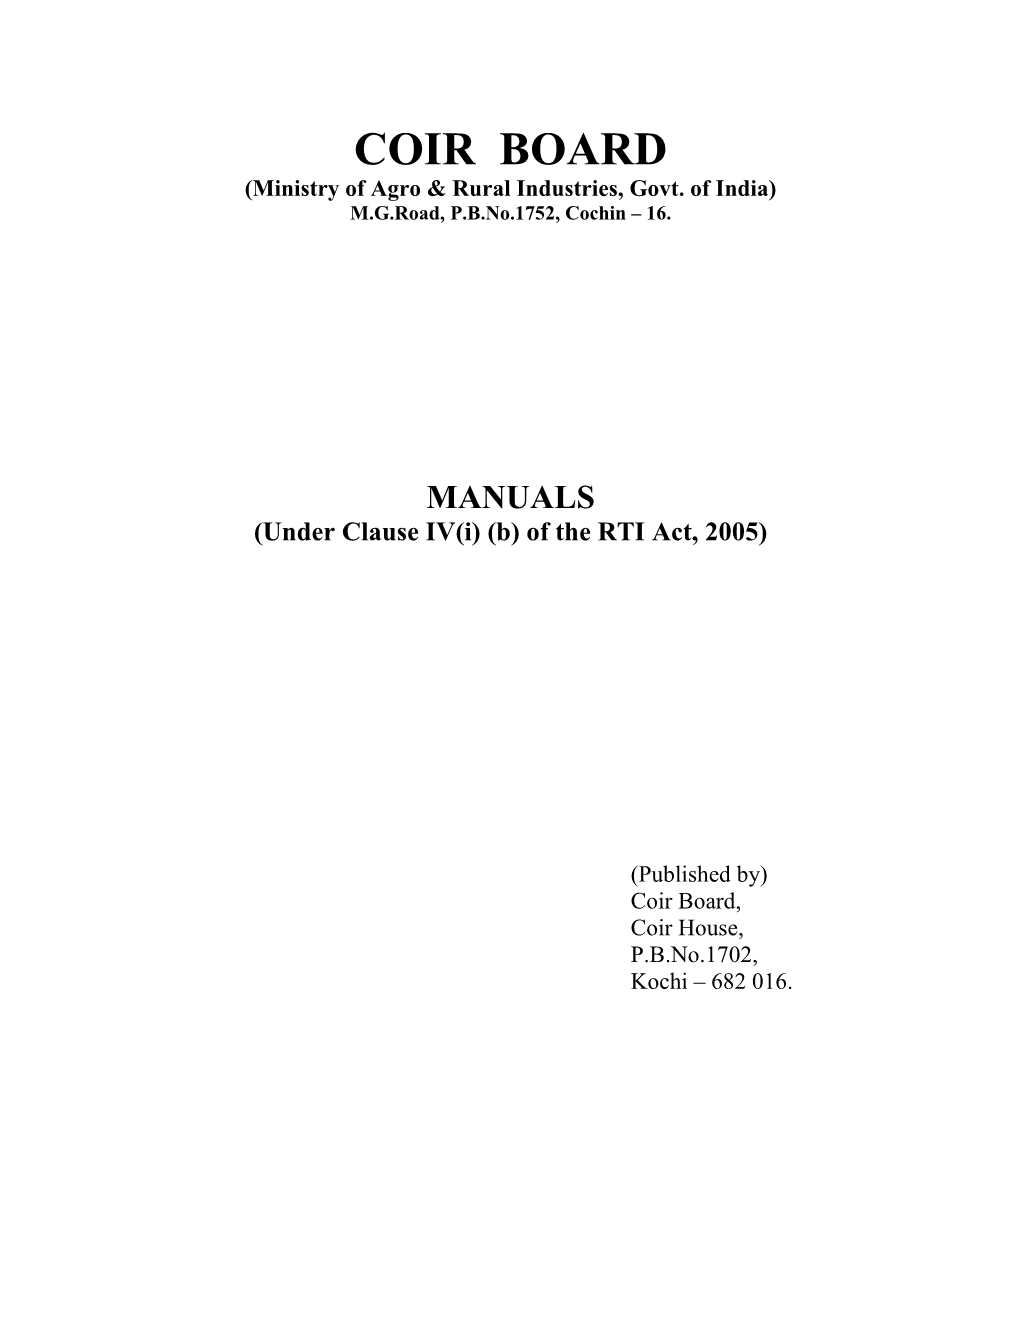 Right to Information Act 2005 (Coir Board Manual)